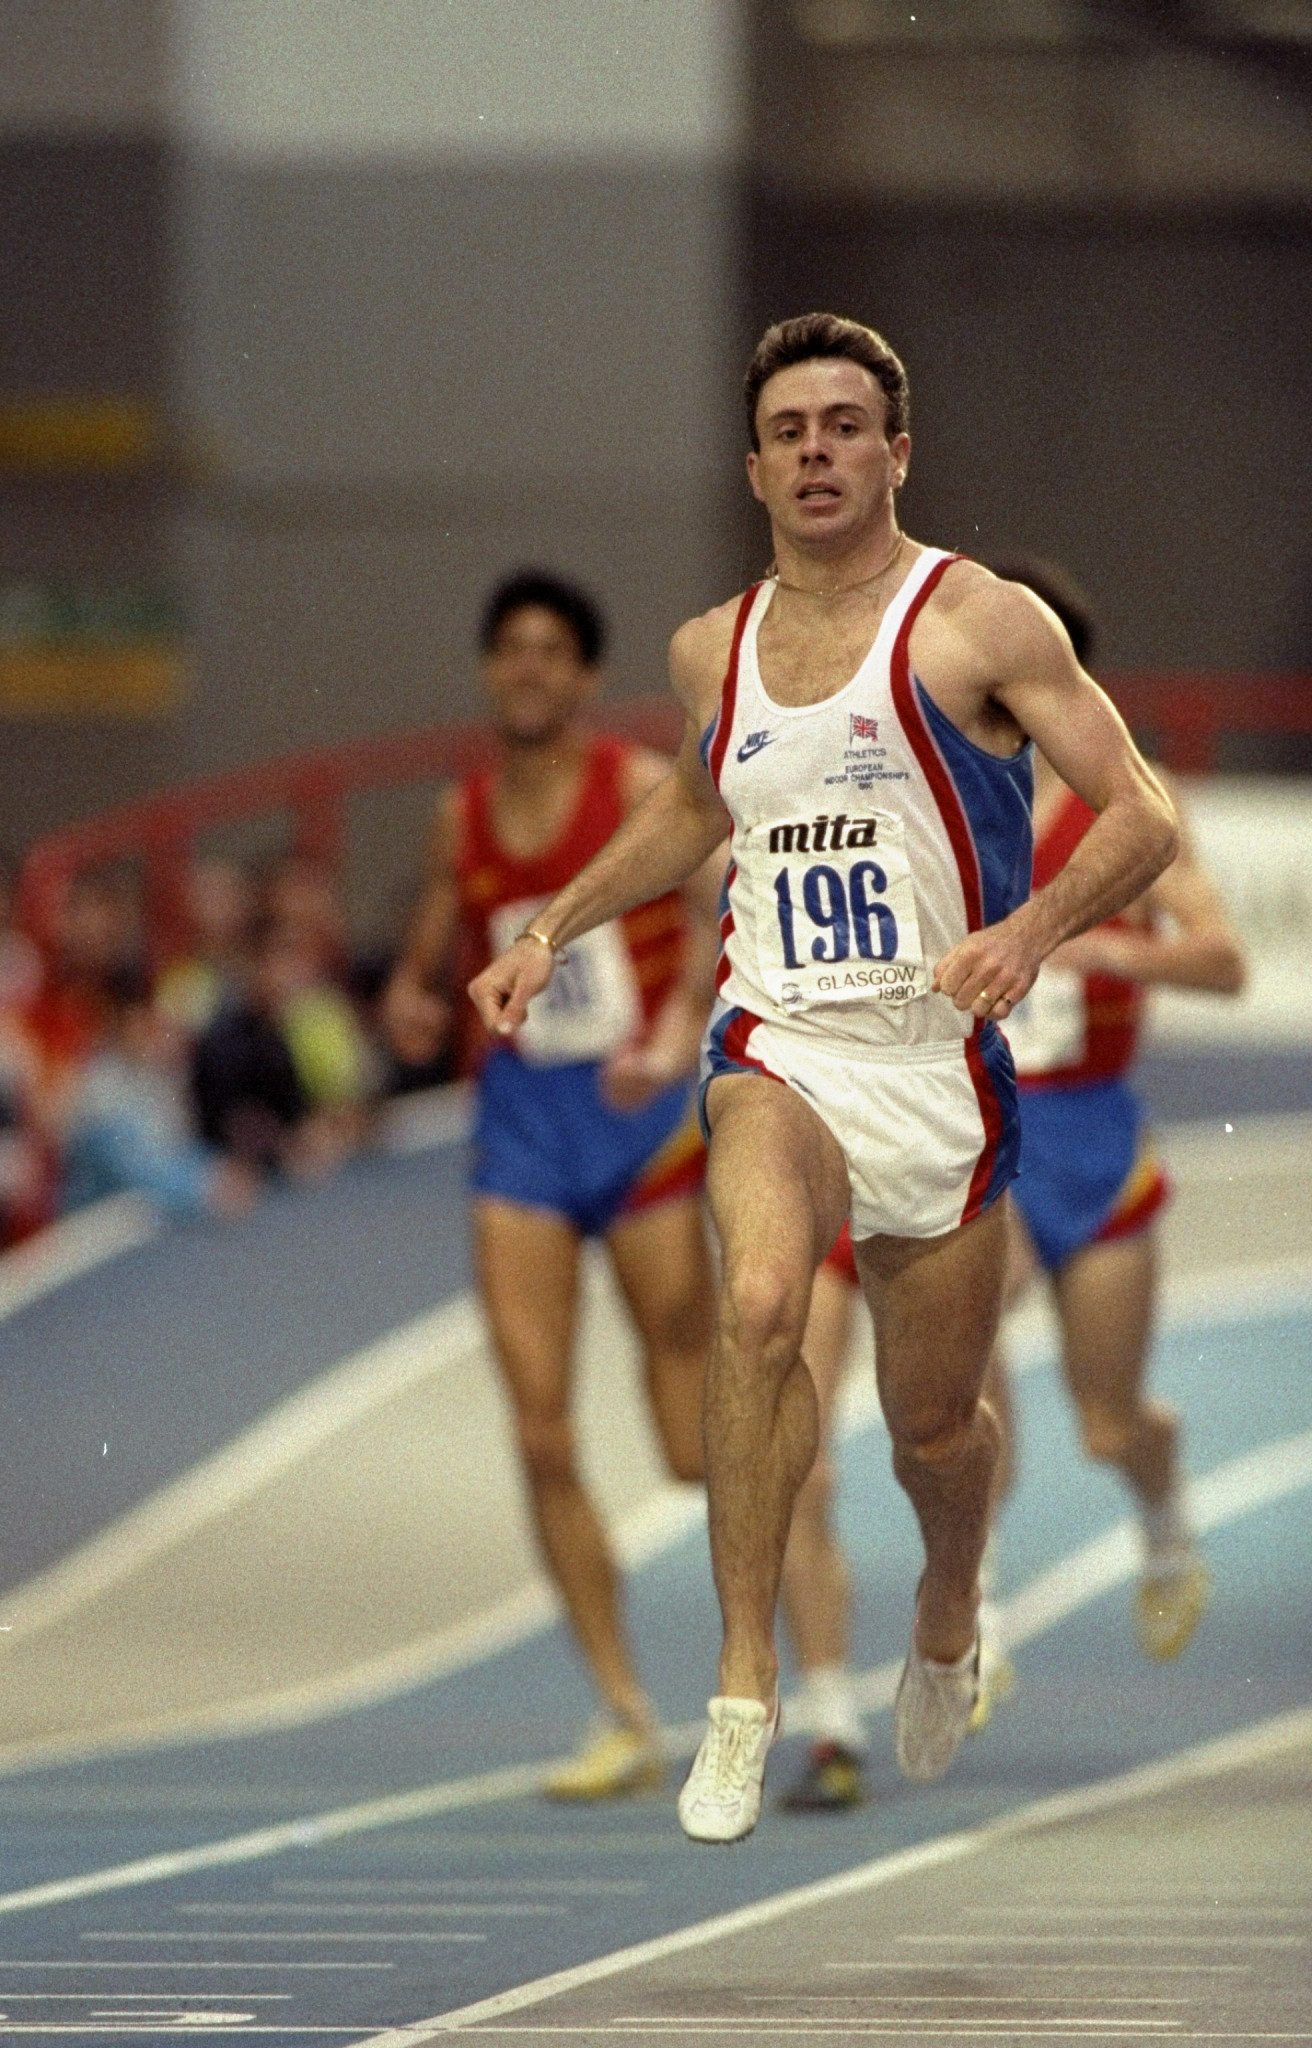 Scotland's Tom McKean wins the European Athletics Indoor 800m title at Glasgow's Kelvin Hall Arena in 1990 ©Getty Images